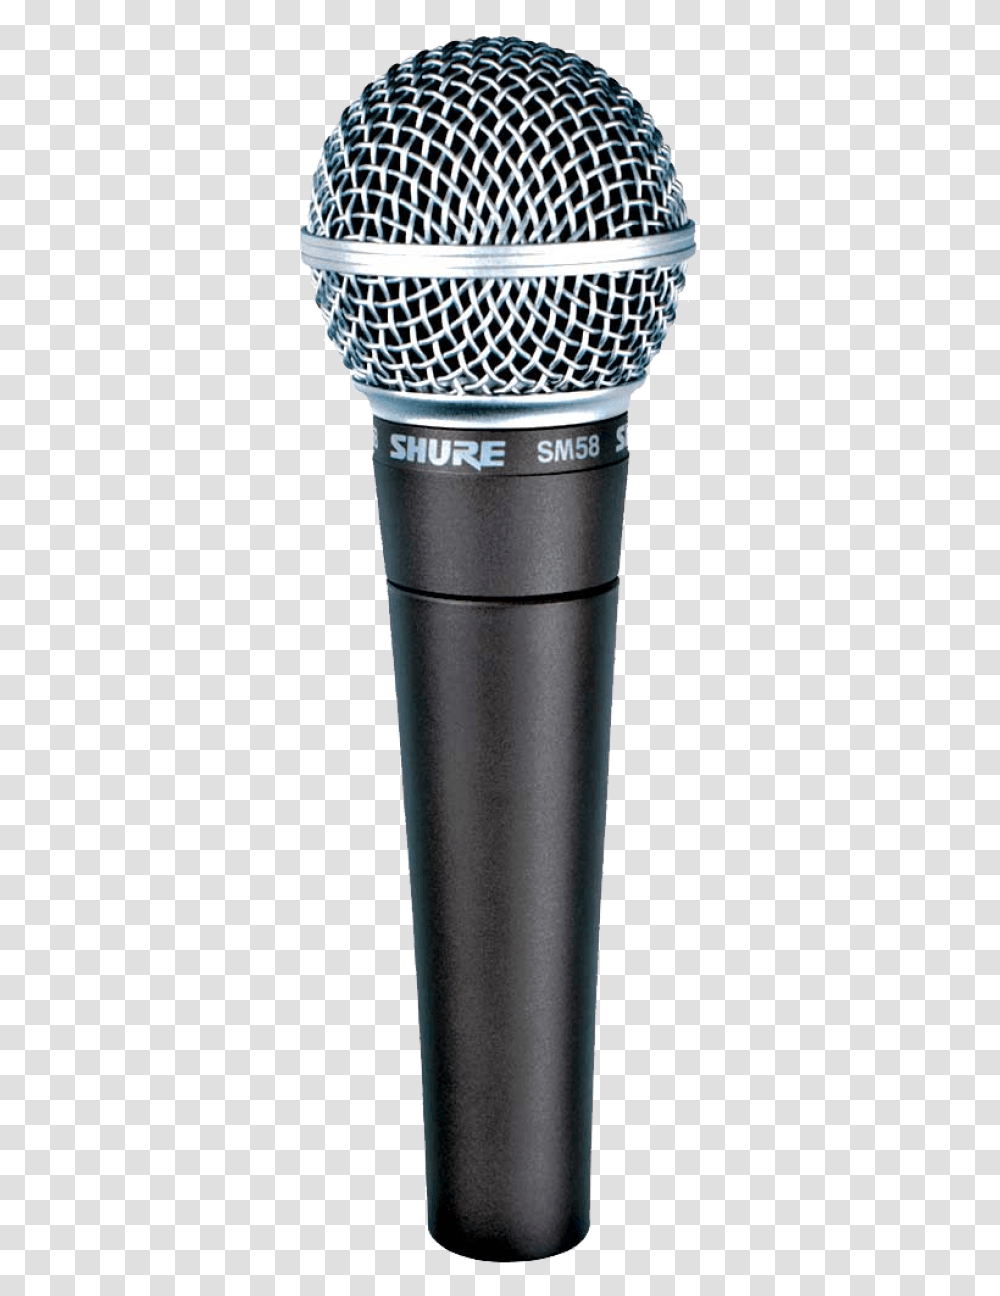 Microphone Image Shure, Shaker, Bottle, Steel, Cup Transparent Png